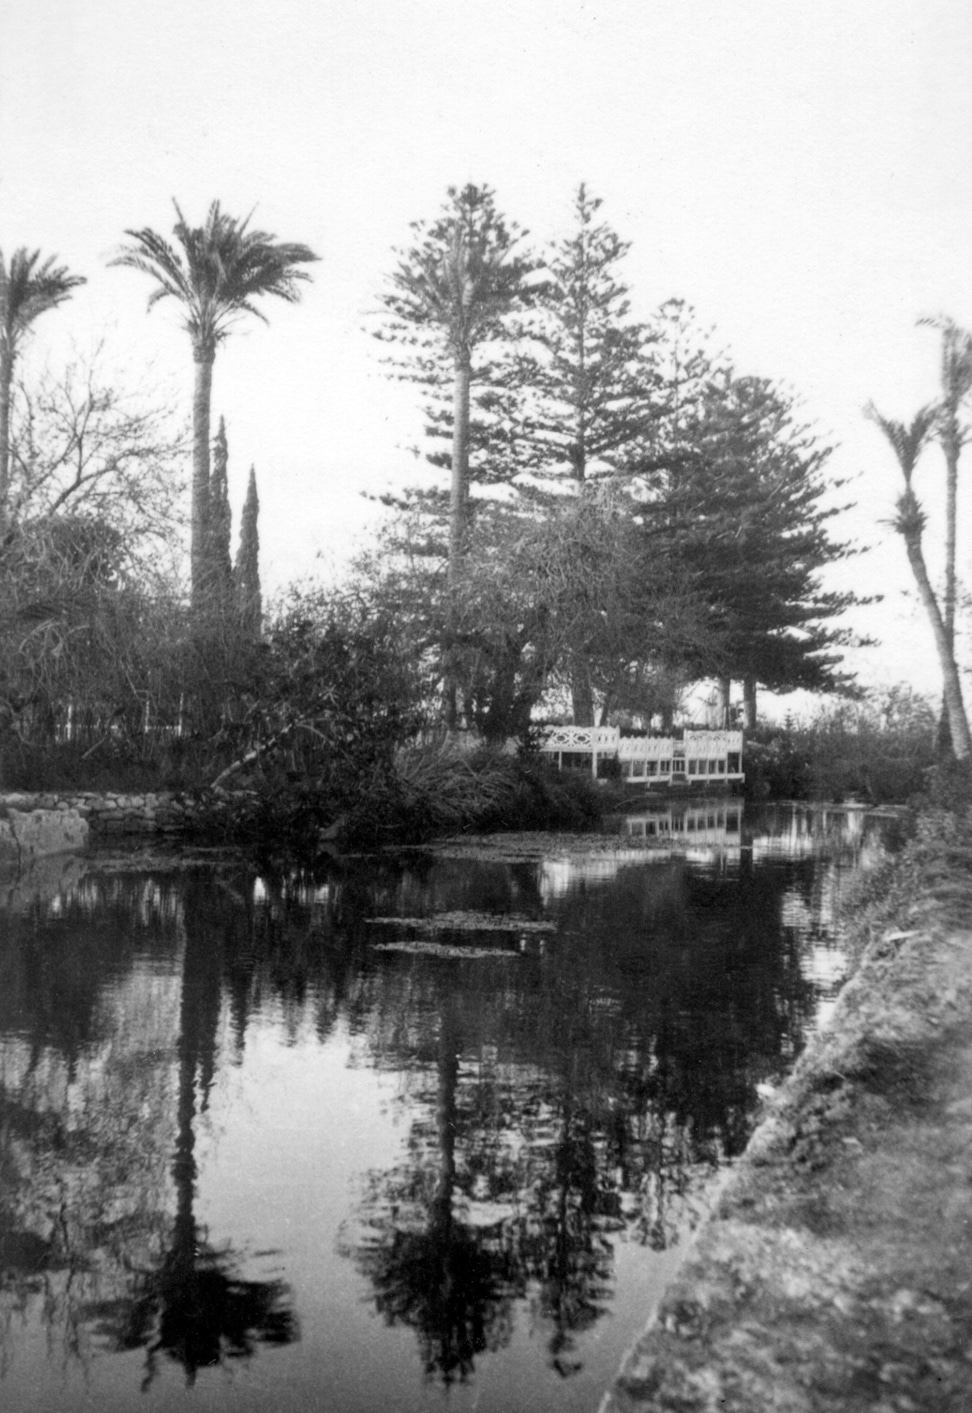 The Riḍván Garden, located outside the city of ‘Akká, was rented by ‘Abdu’l-Bahá in 1875 and prepared for Bahá’u’lláh's use. Bahá’u’lláh visited this garden many times during the latter part of his life, c. 1920